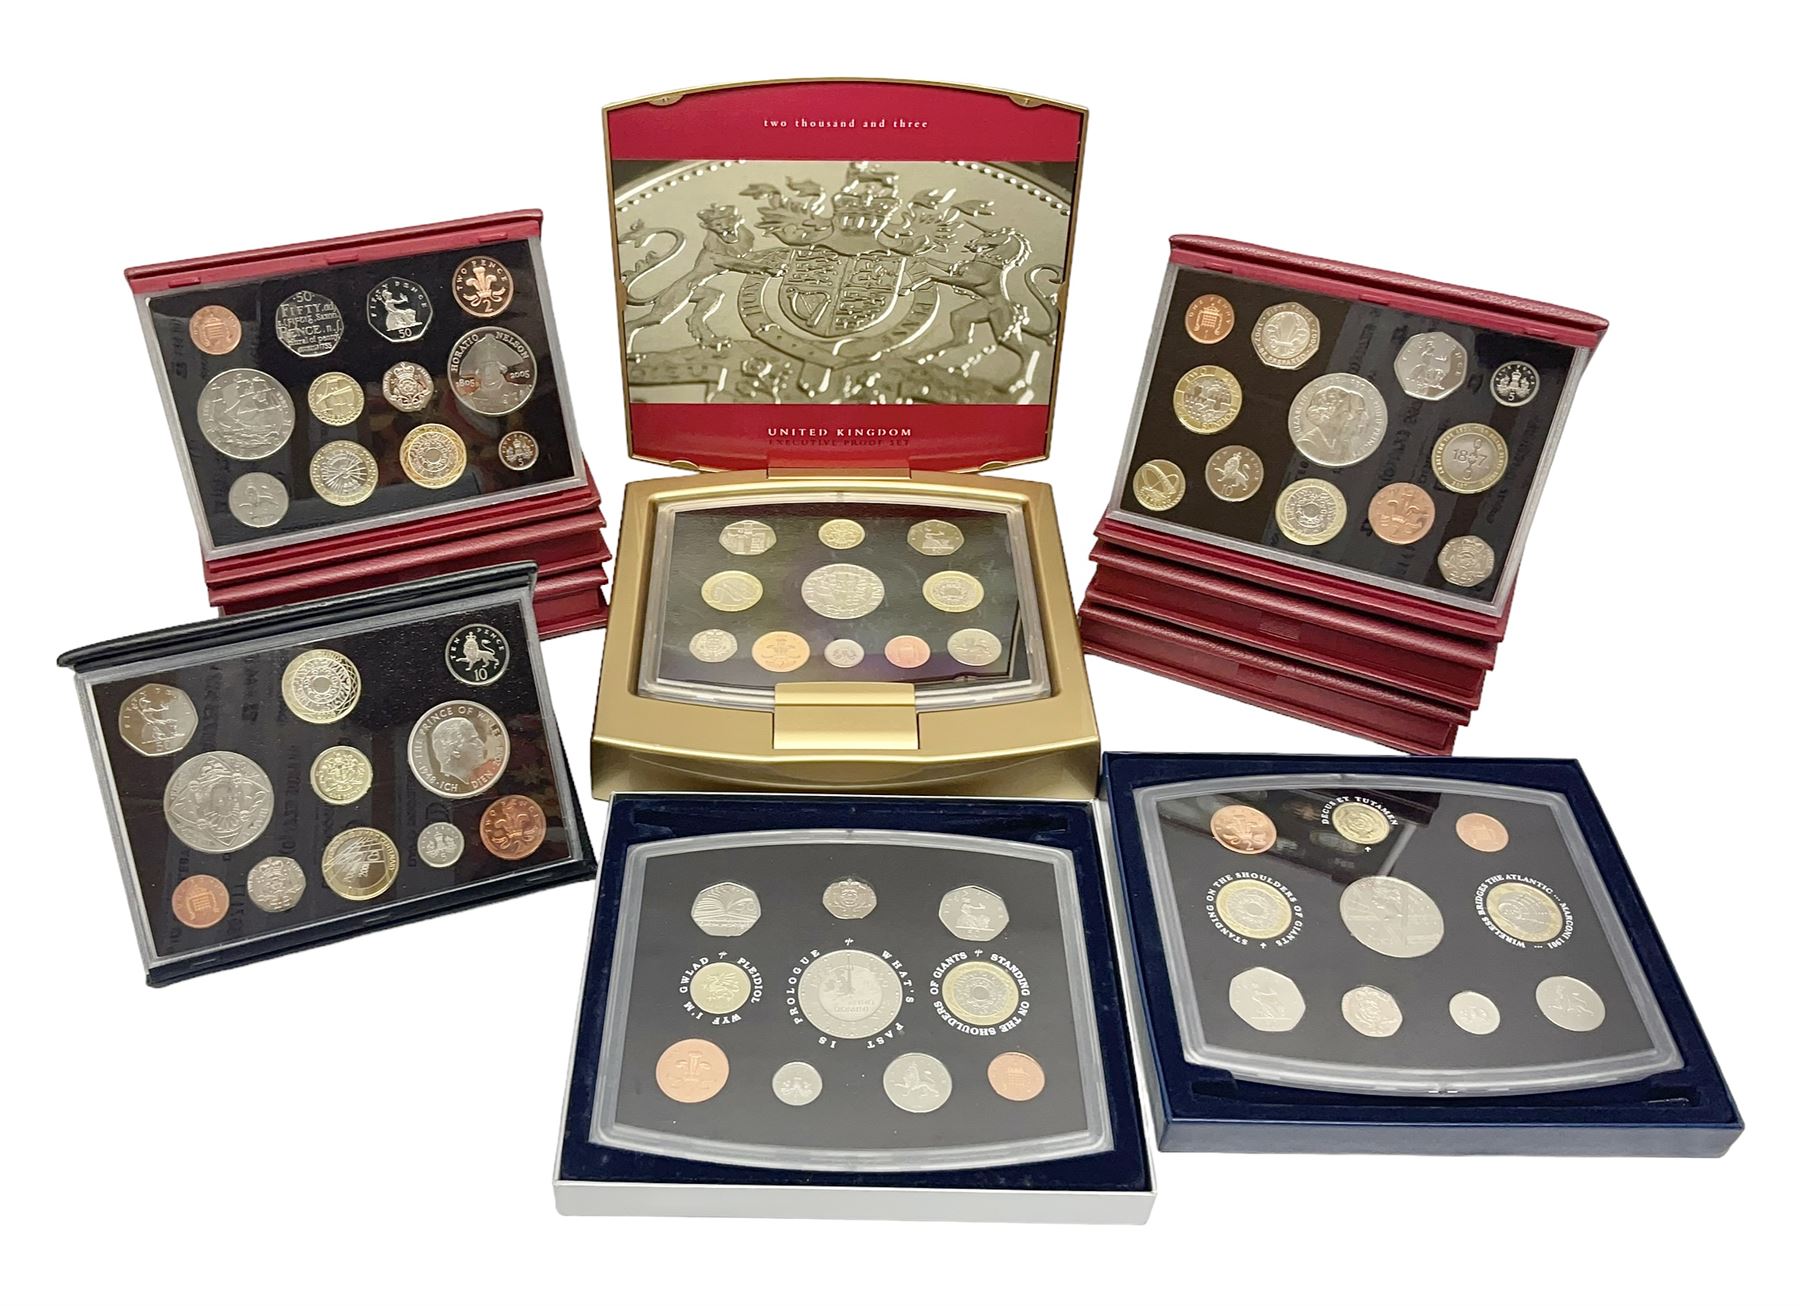 Ten The Royal Mint United Kingdom proof coin sets